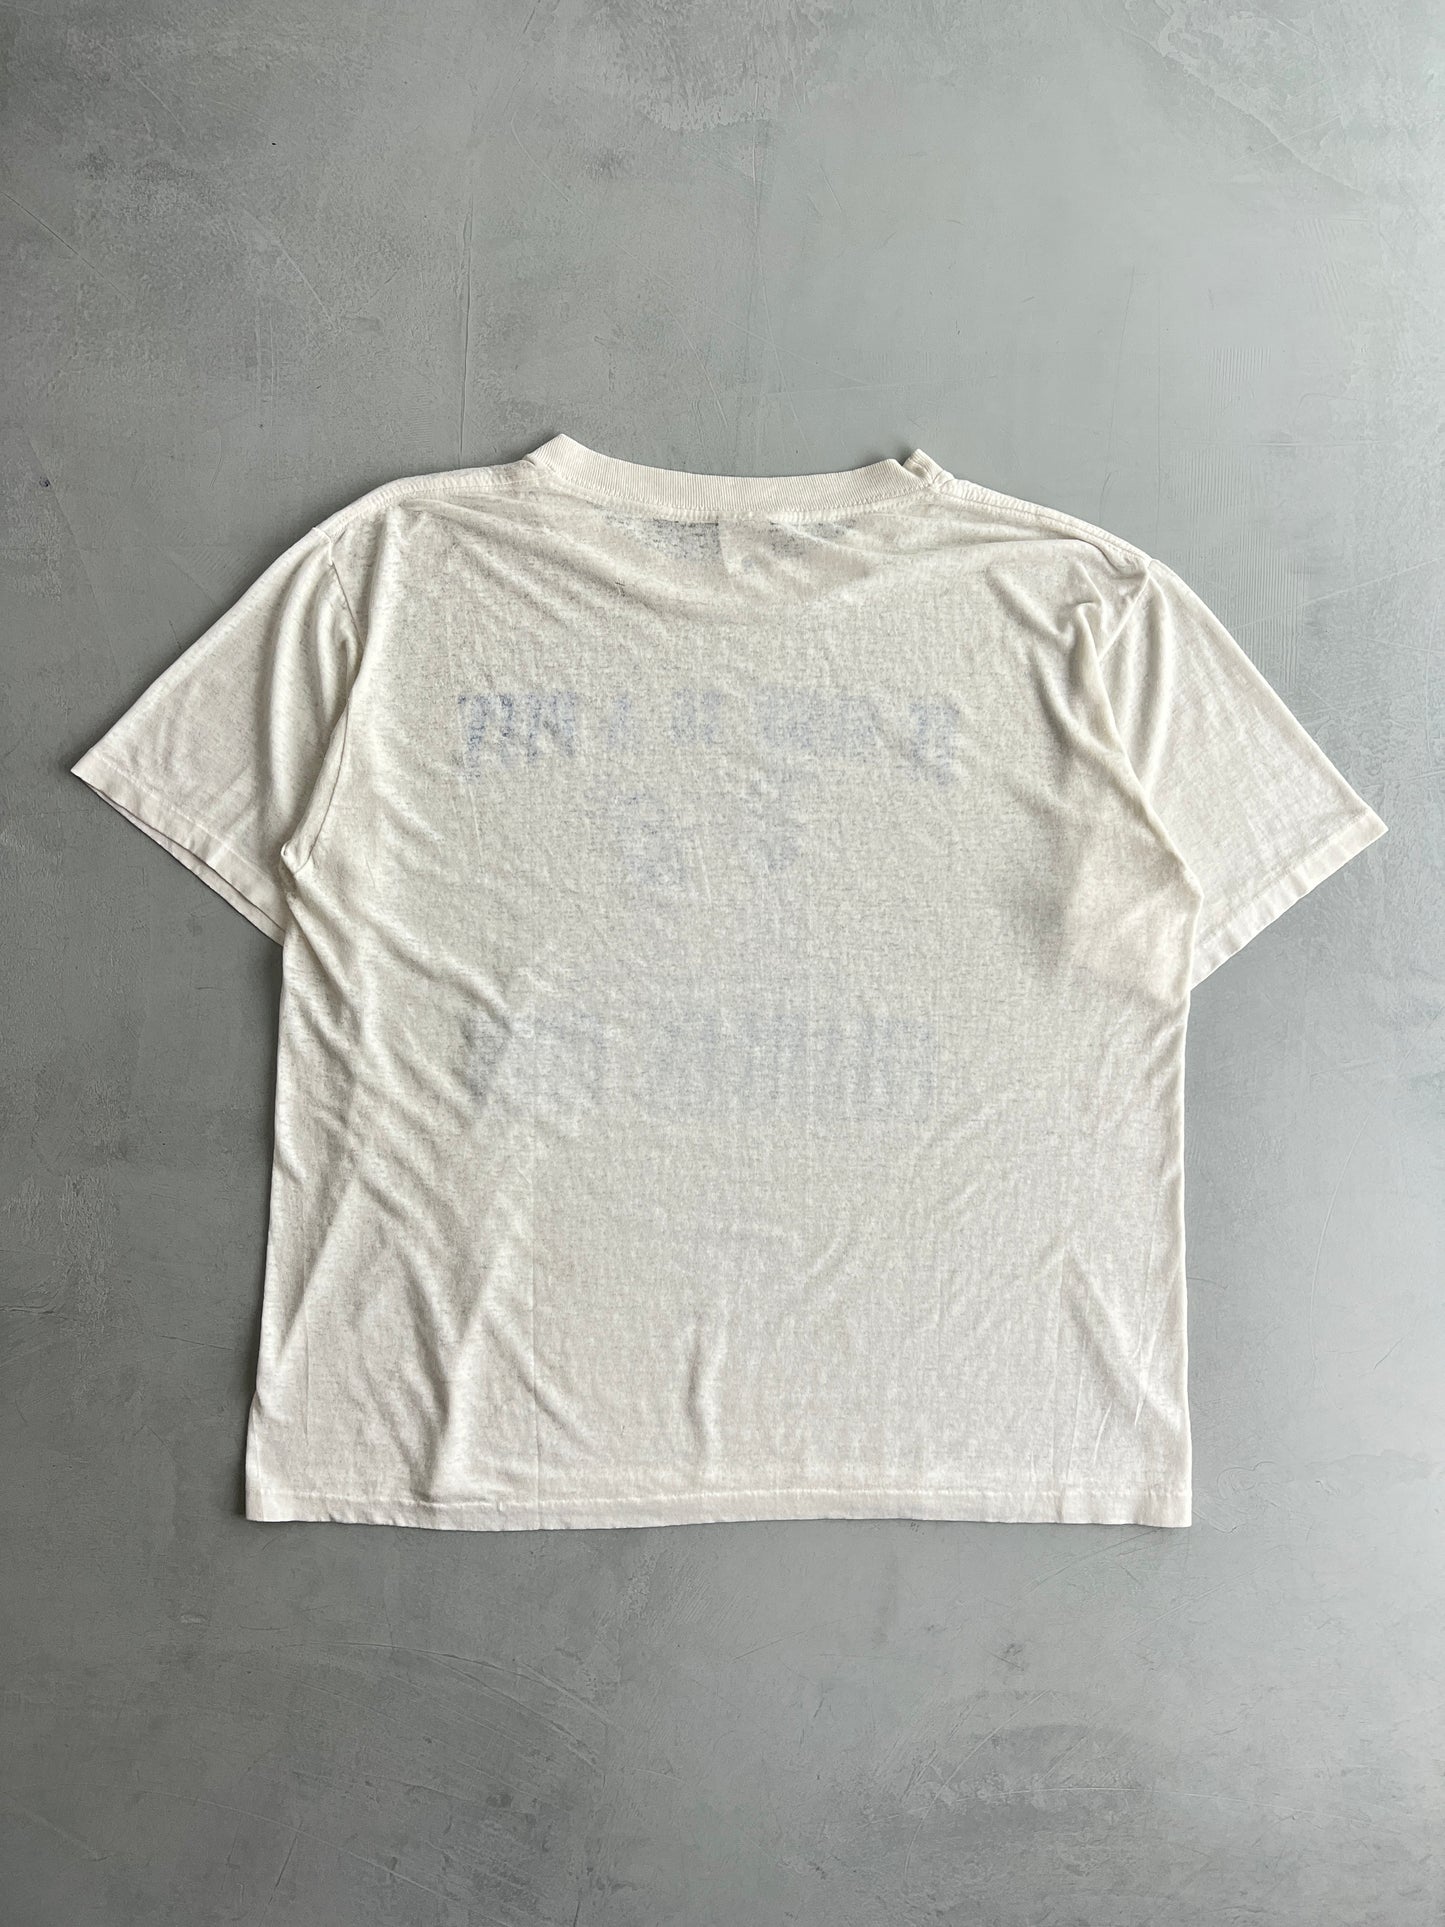 80's Paper Thin 'It Sure Is A Pity' Tee [L]